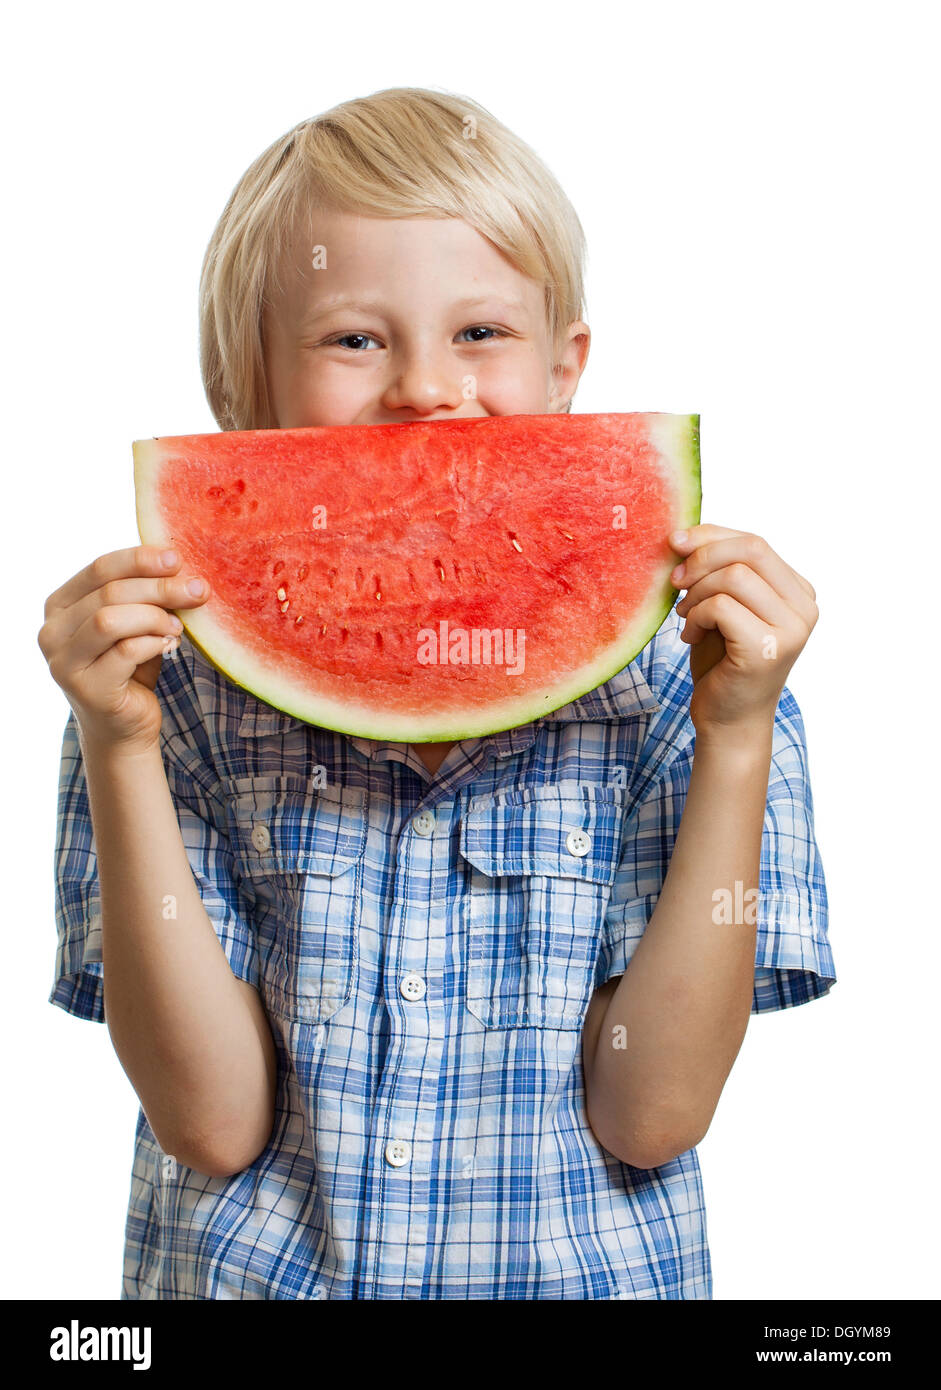 A cute happy boy peeking behind a juicy slice of watermelon. Isolated on white. Stock Photo